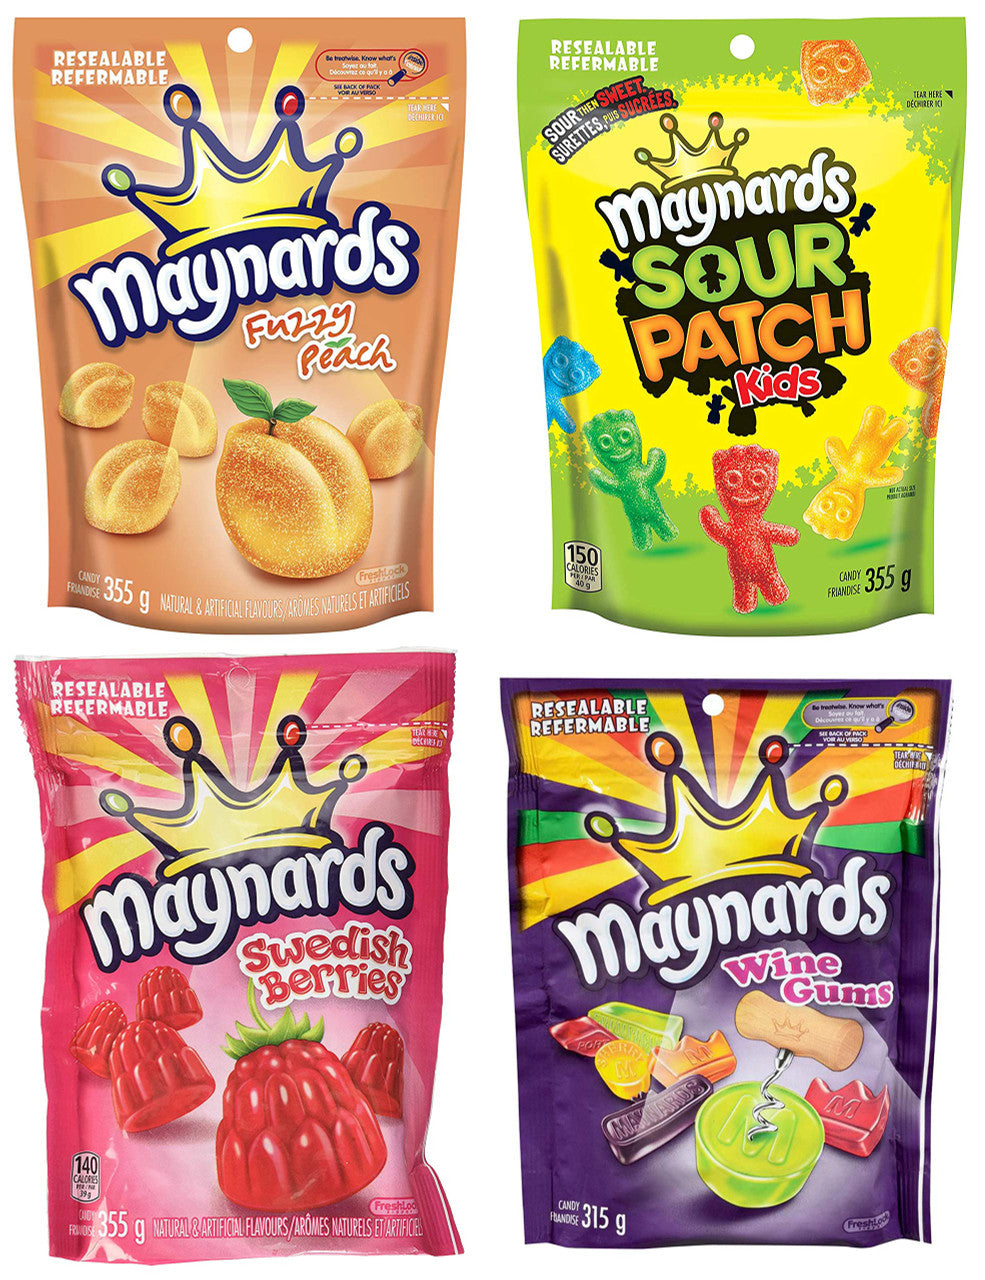 Maynards Fuzzy Peach, Wine Gums, Swedish Berries, Sour Patch Kids Candy, 355g/12.5 oz. (4pk) {Imported from Canada}